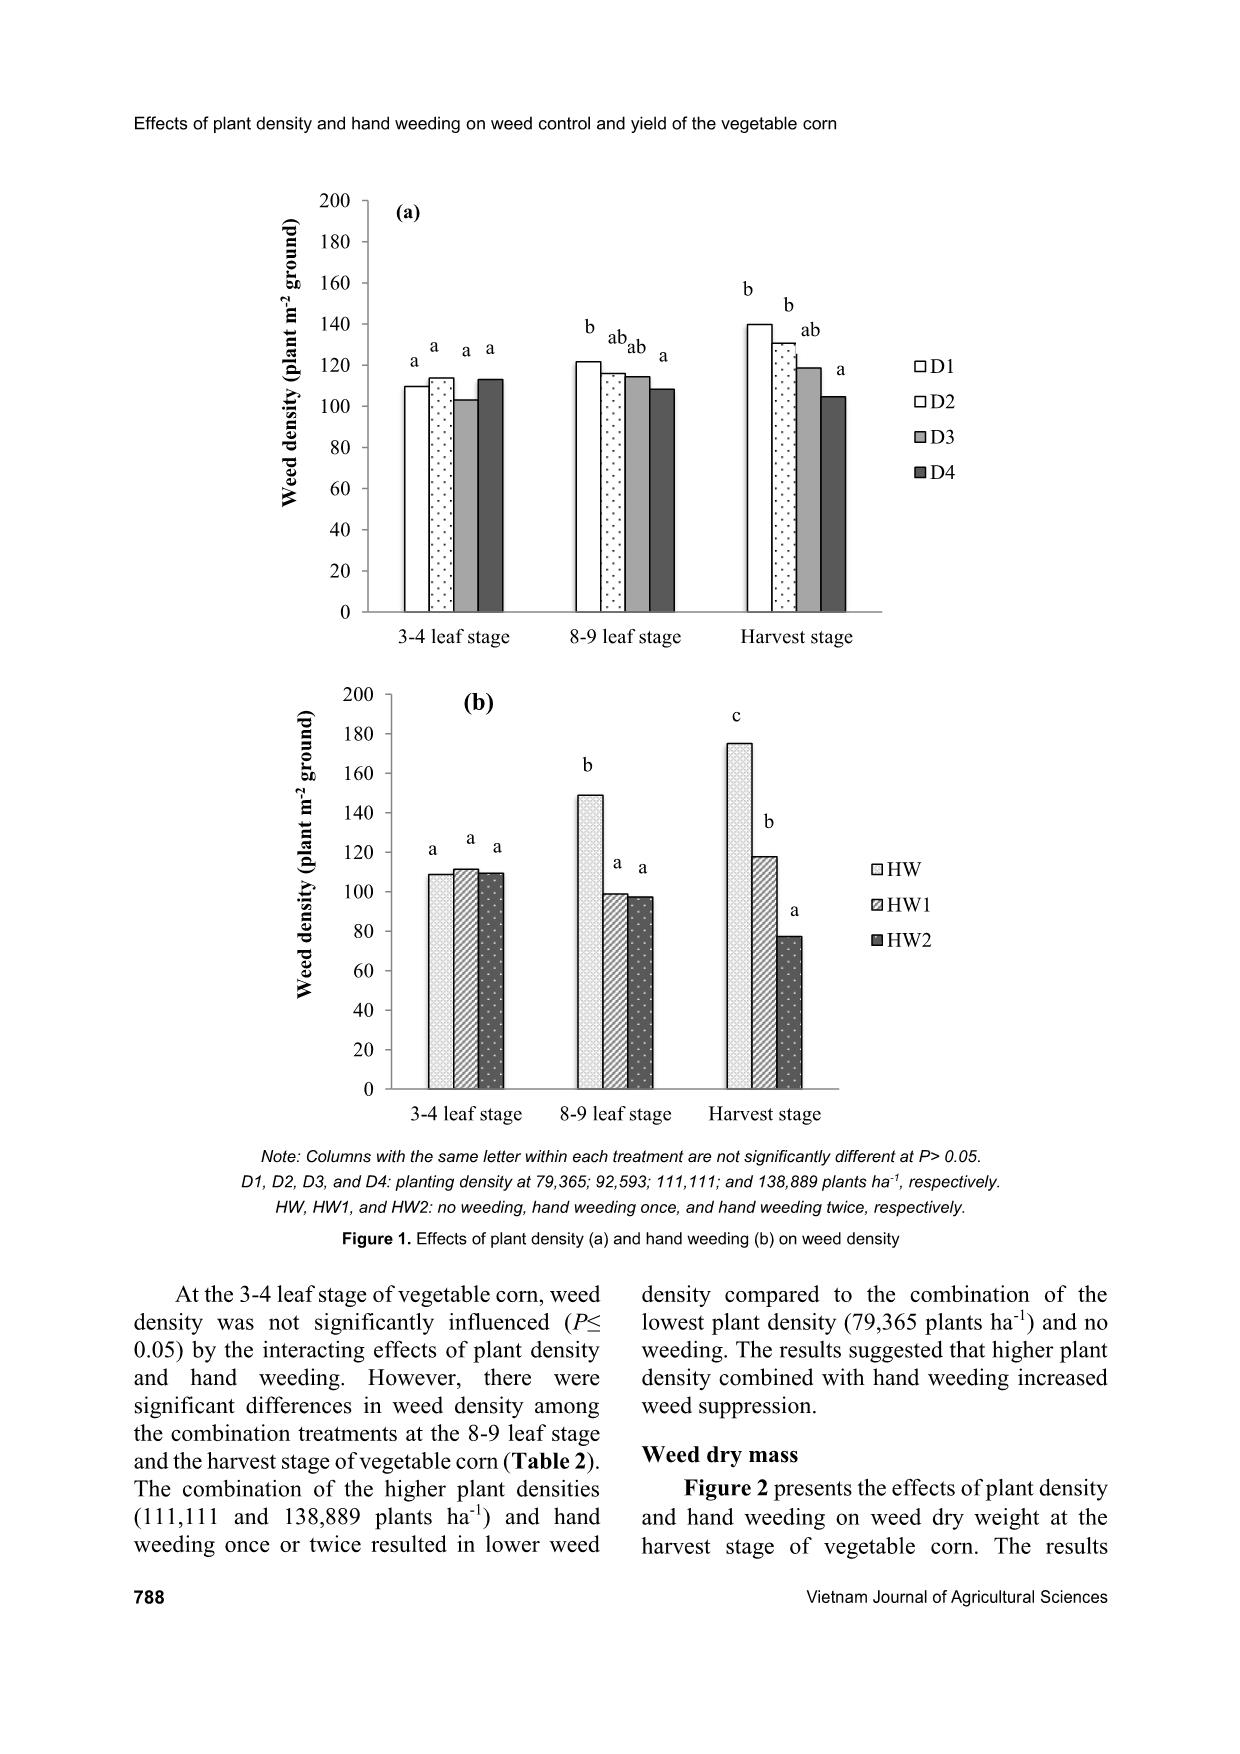 Effect of plant density and hand weeding on weed control and yield of the vegetable corn trang 5